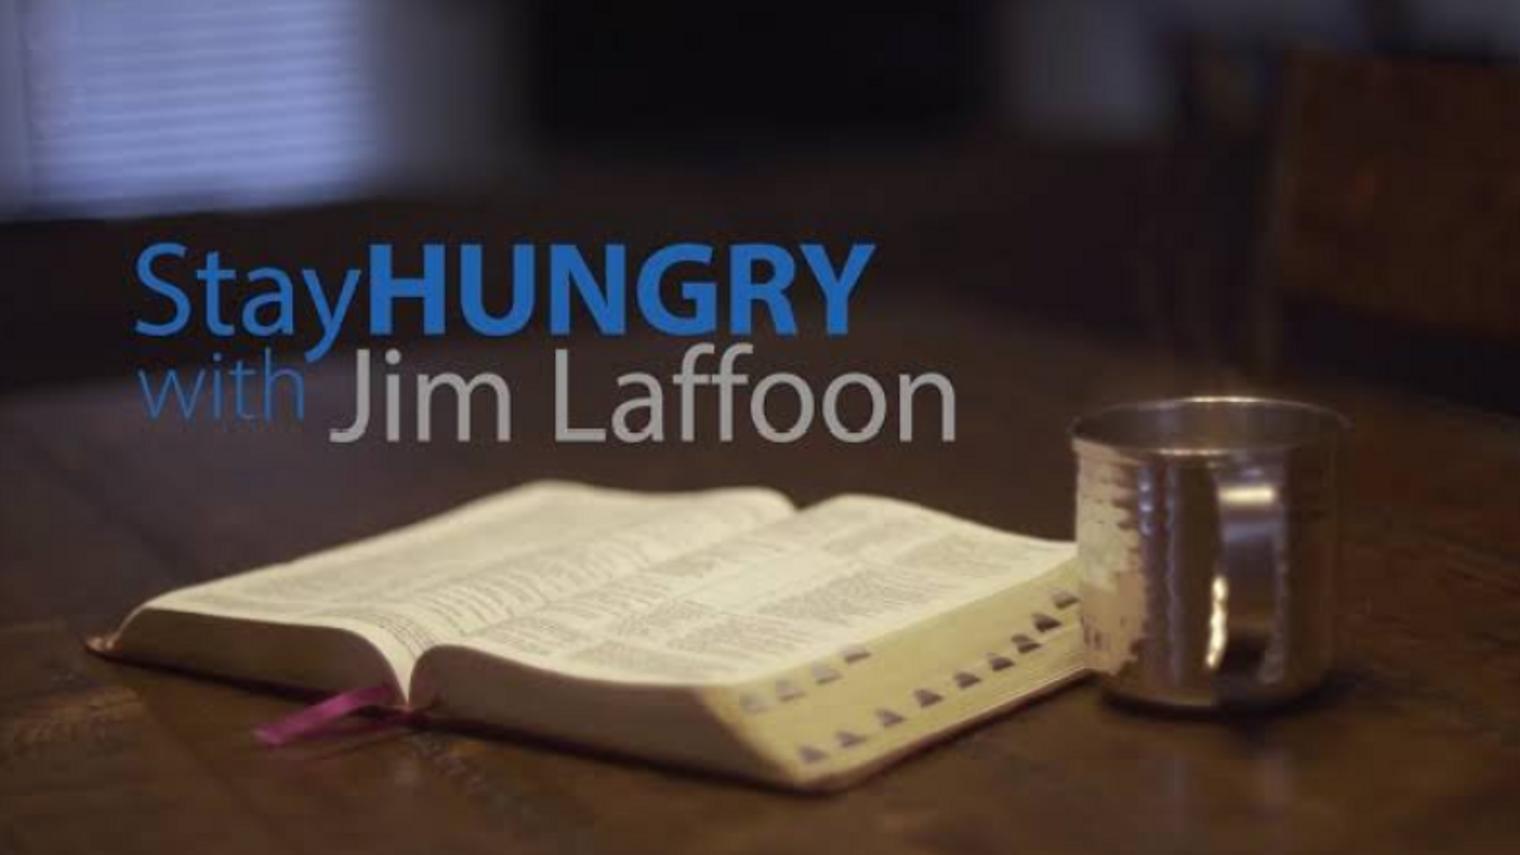 Stay Hungry with Jim Laffoon